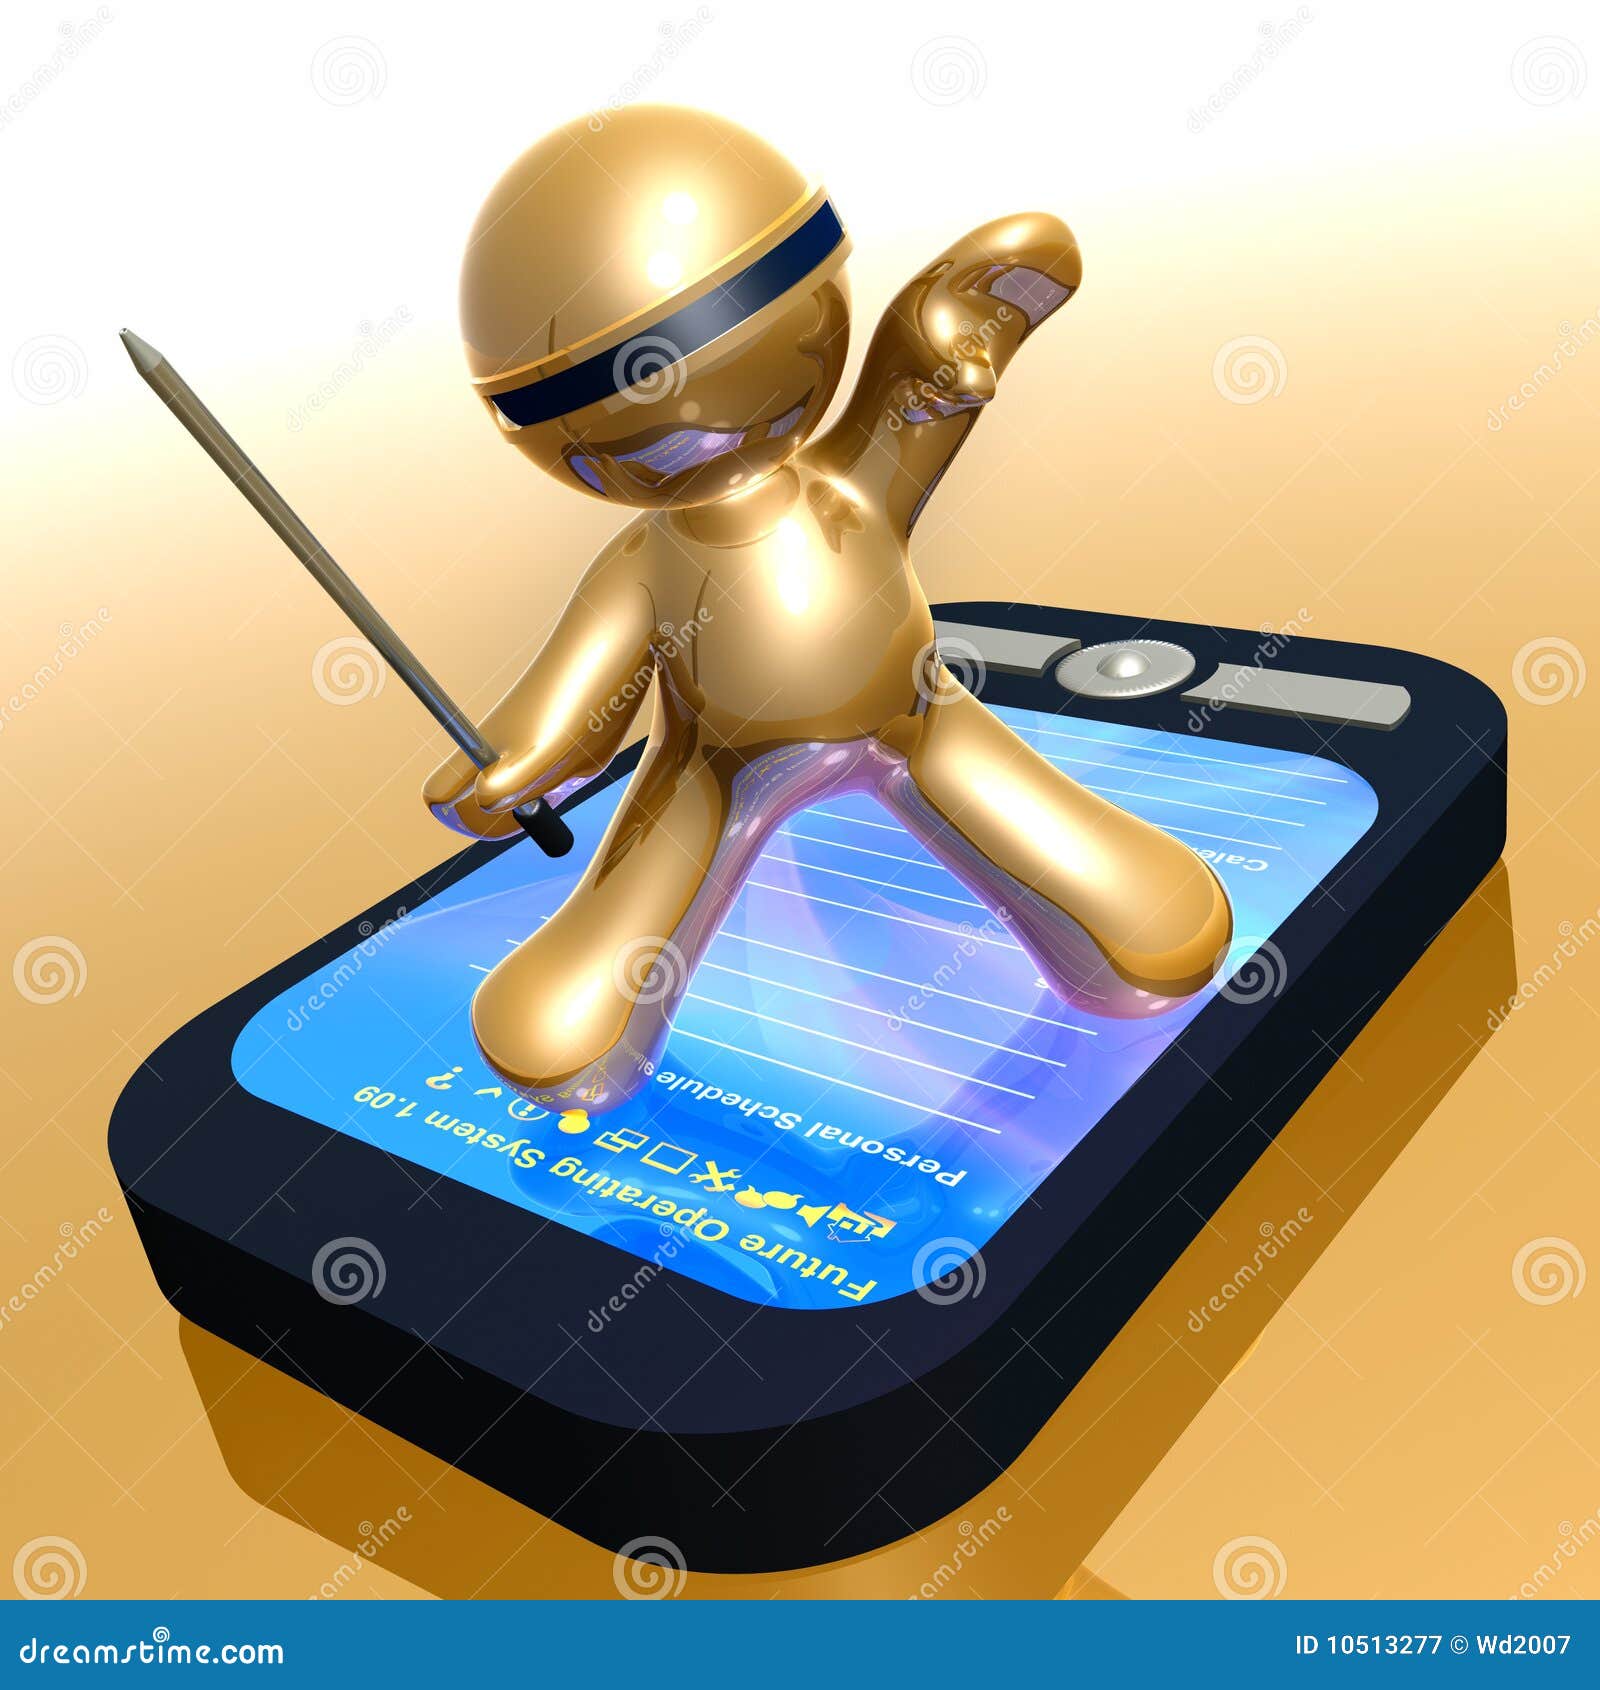 funny 3d icon with pda gadget